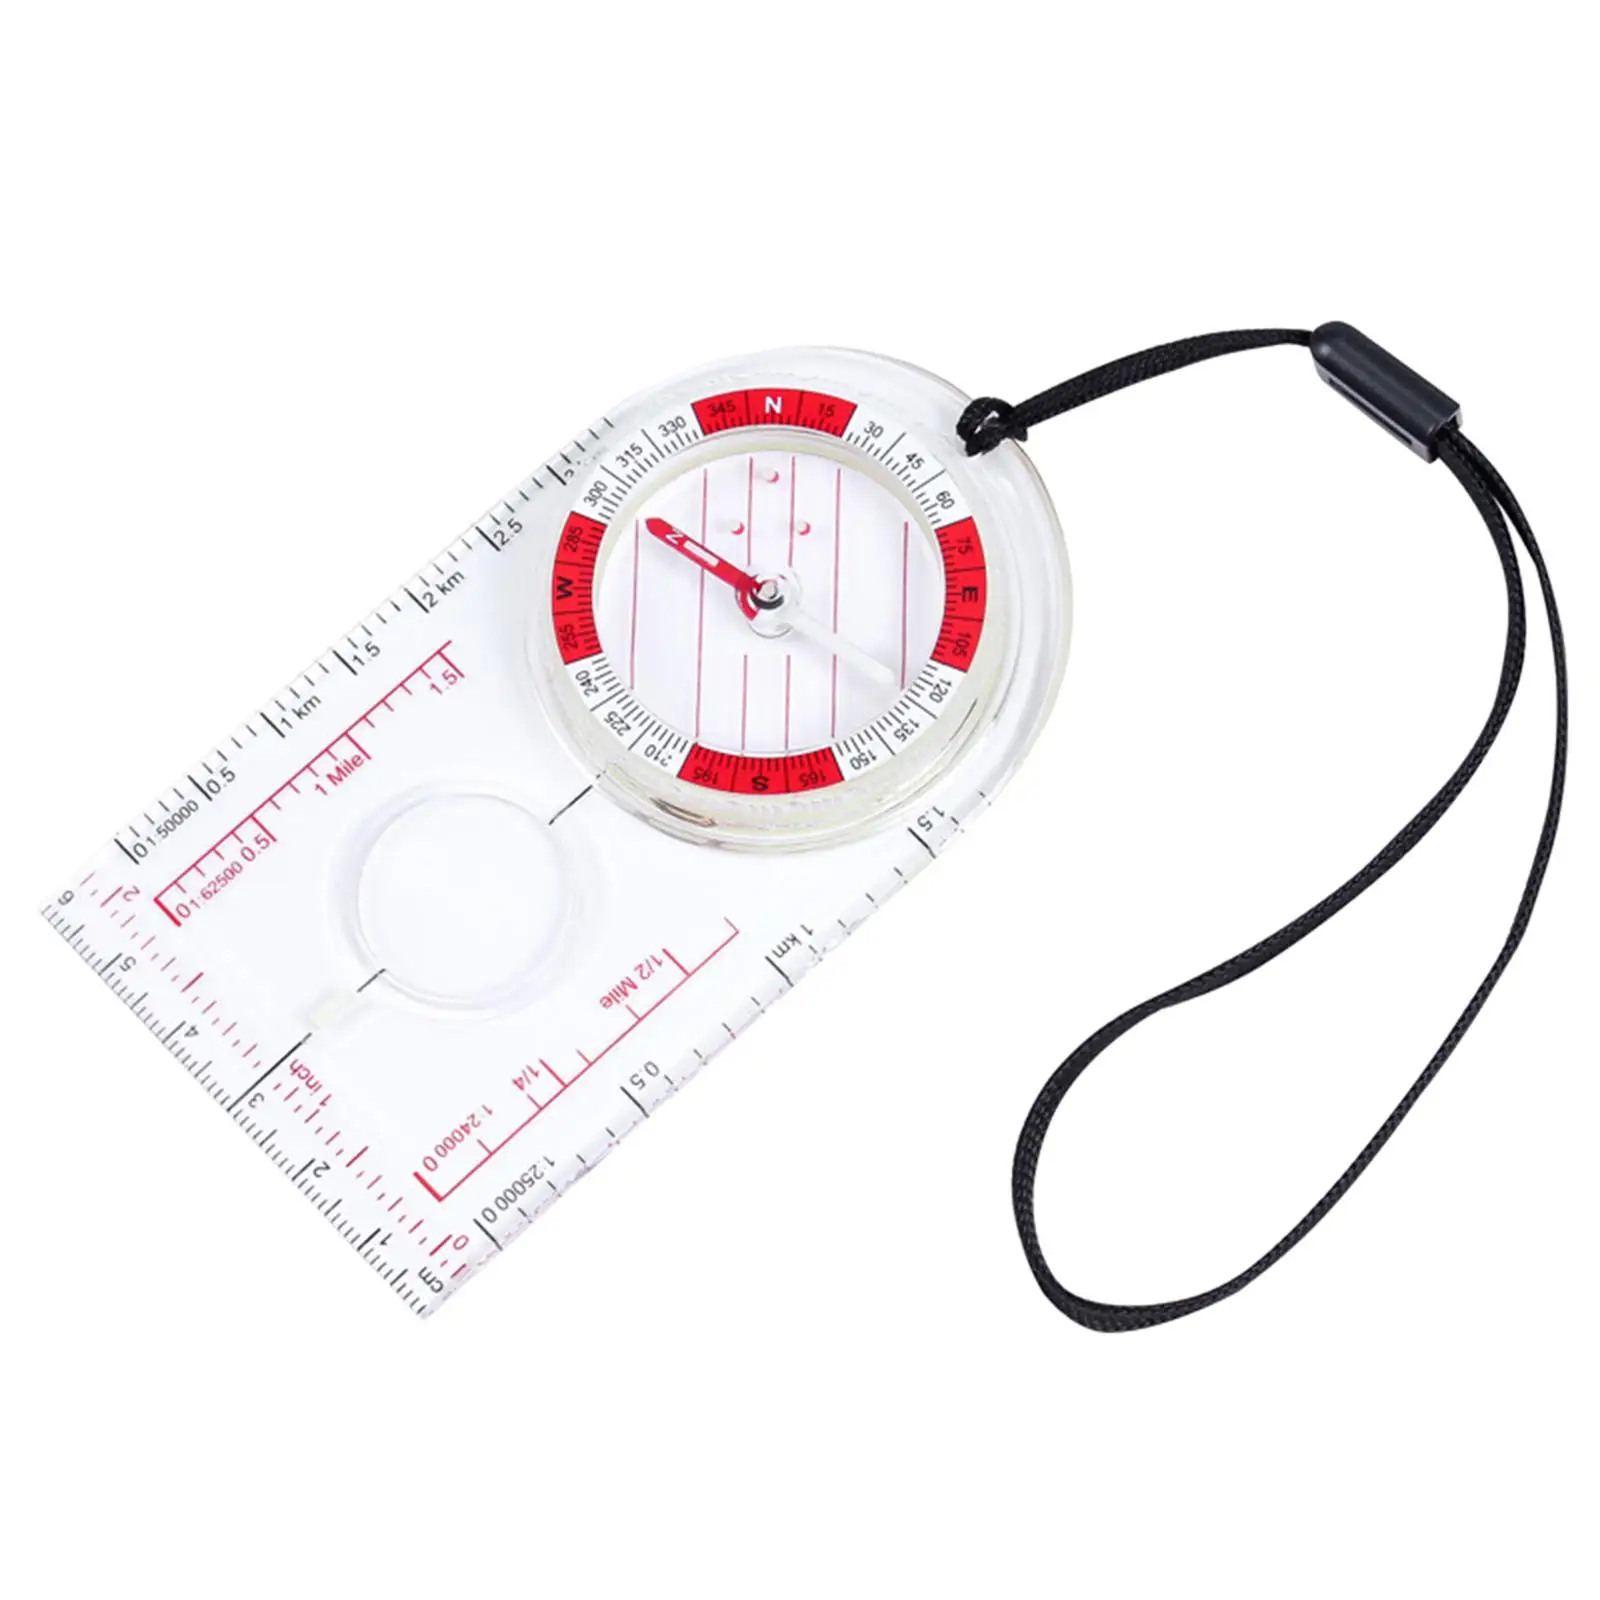 Orienteering Compass Multifunctional Portable Outdoor Luminous Compass for Training Hiking Outdoor Sports Reading Boating